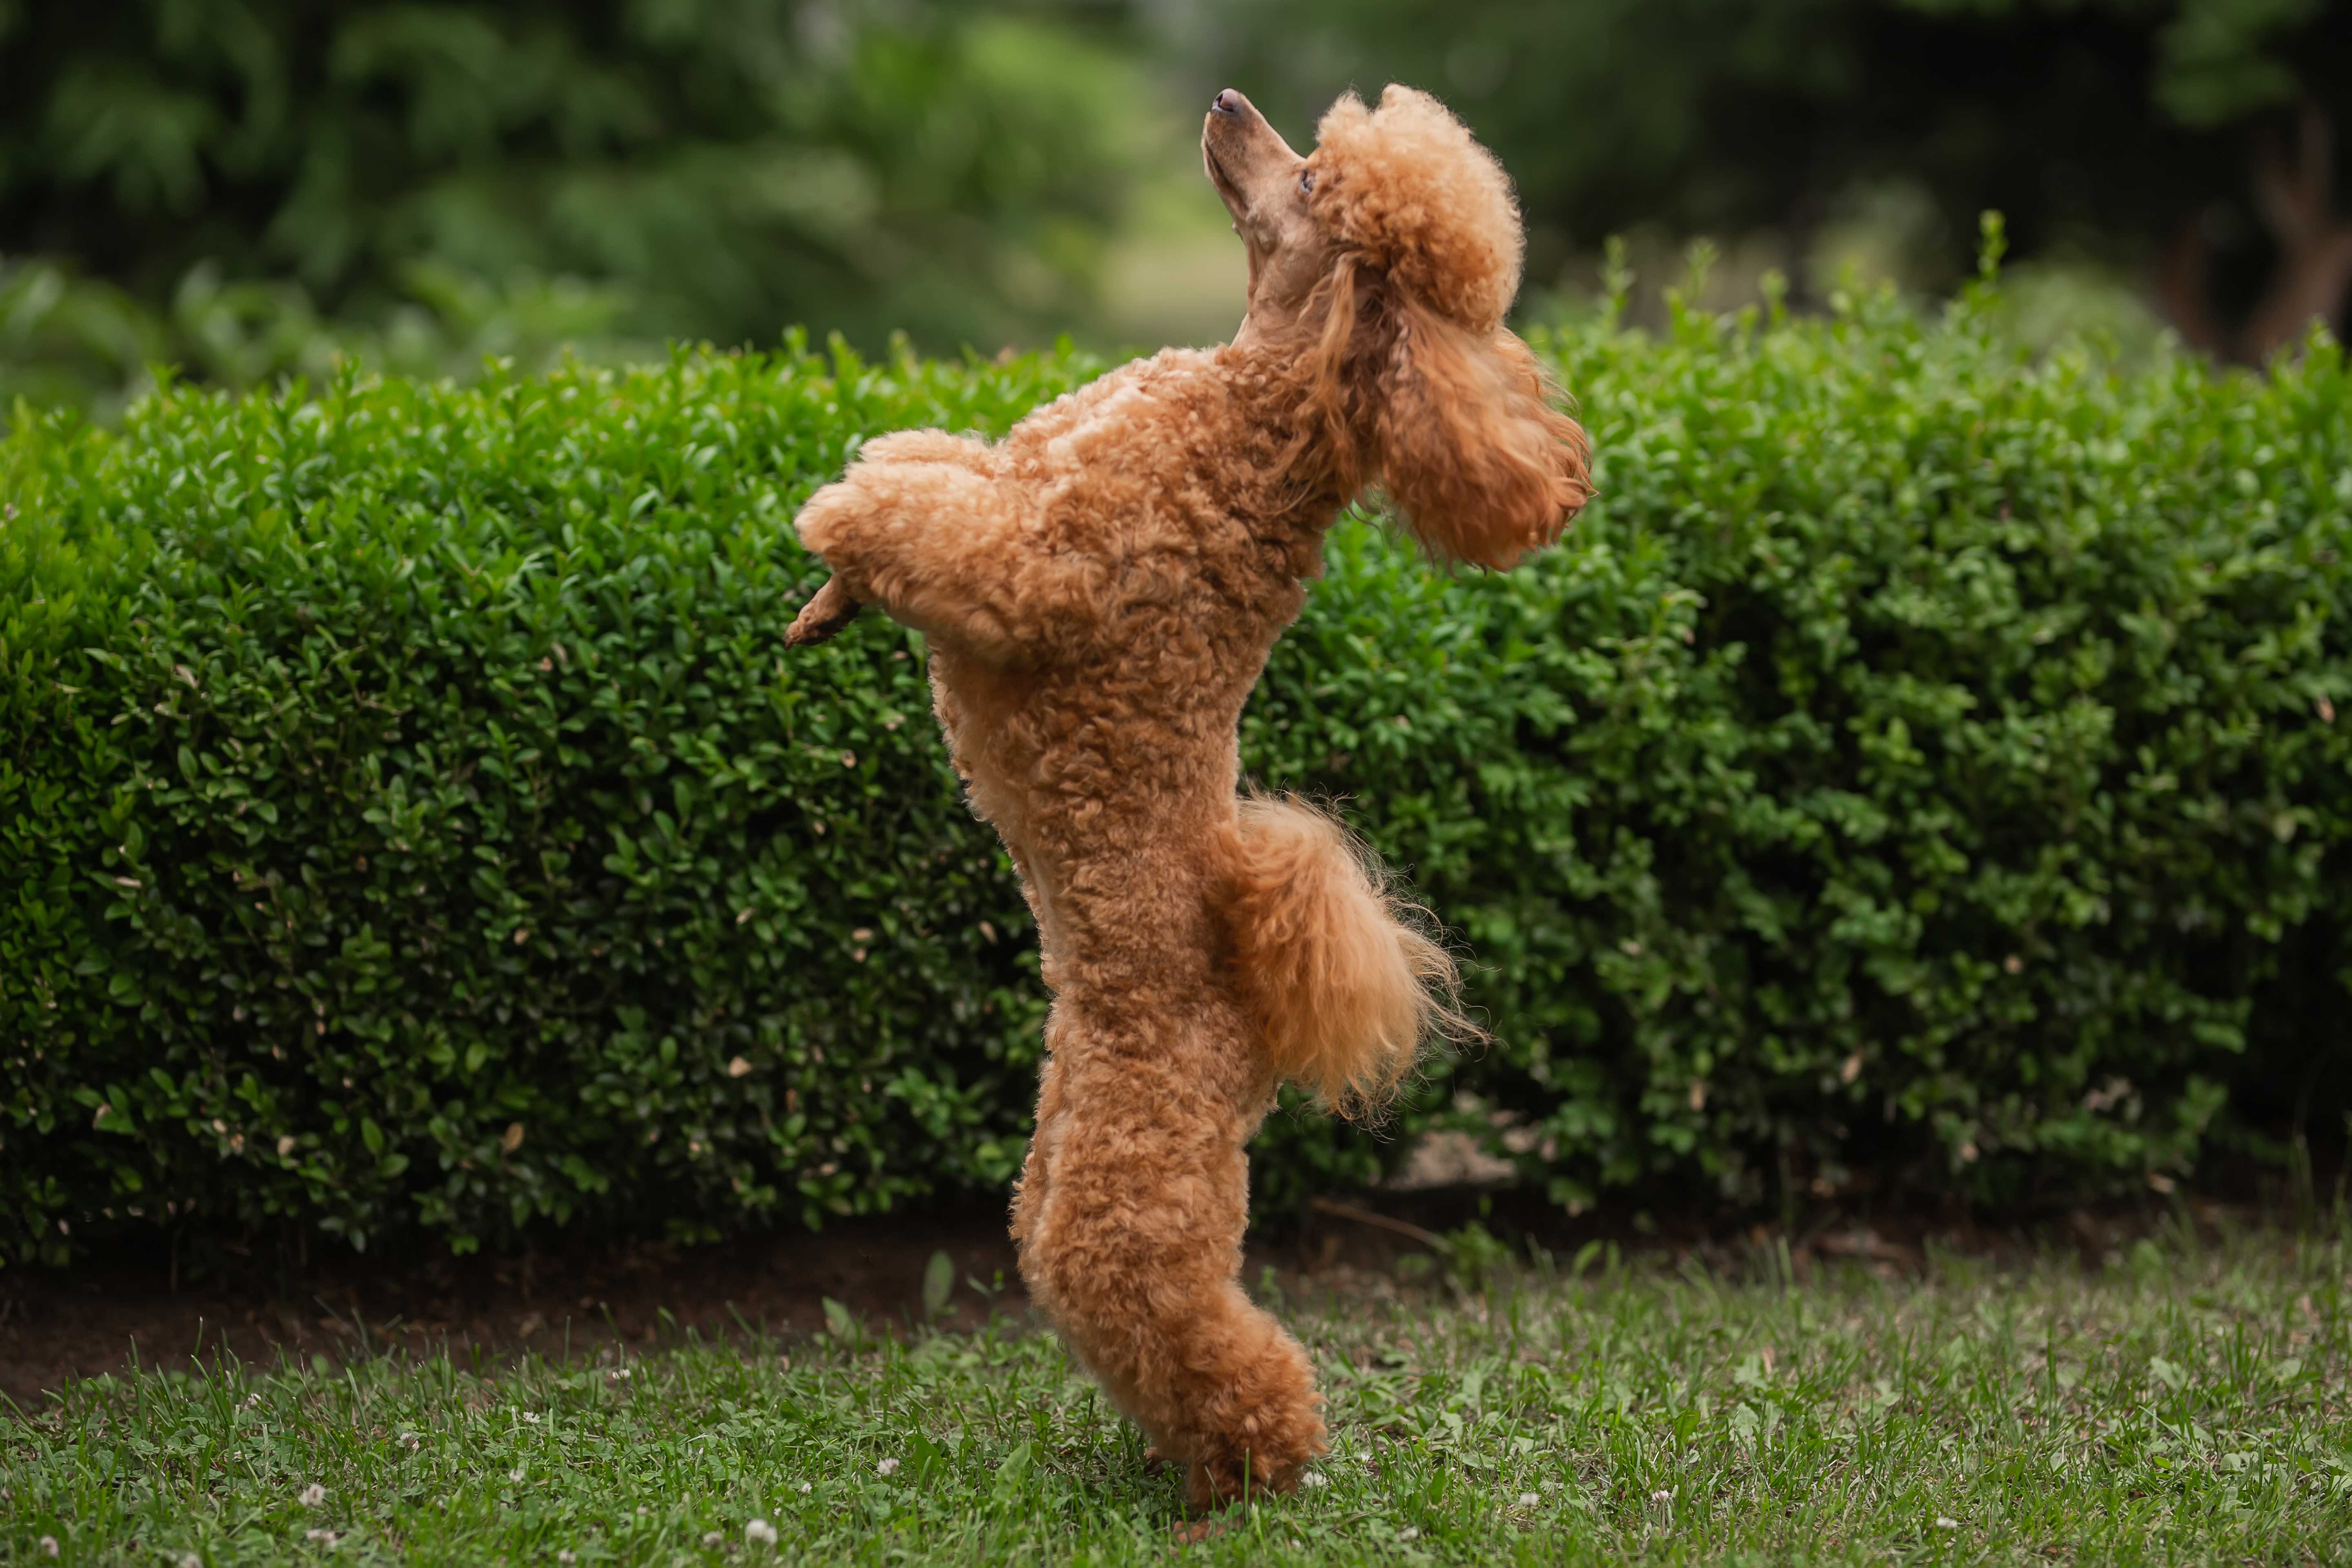 Poodle jumping